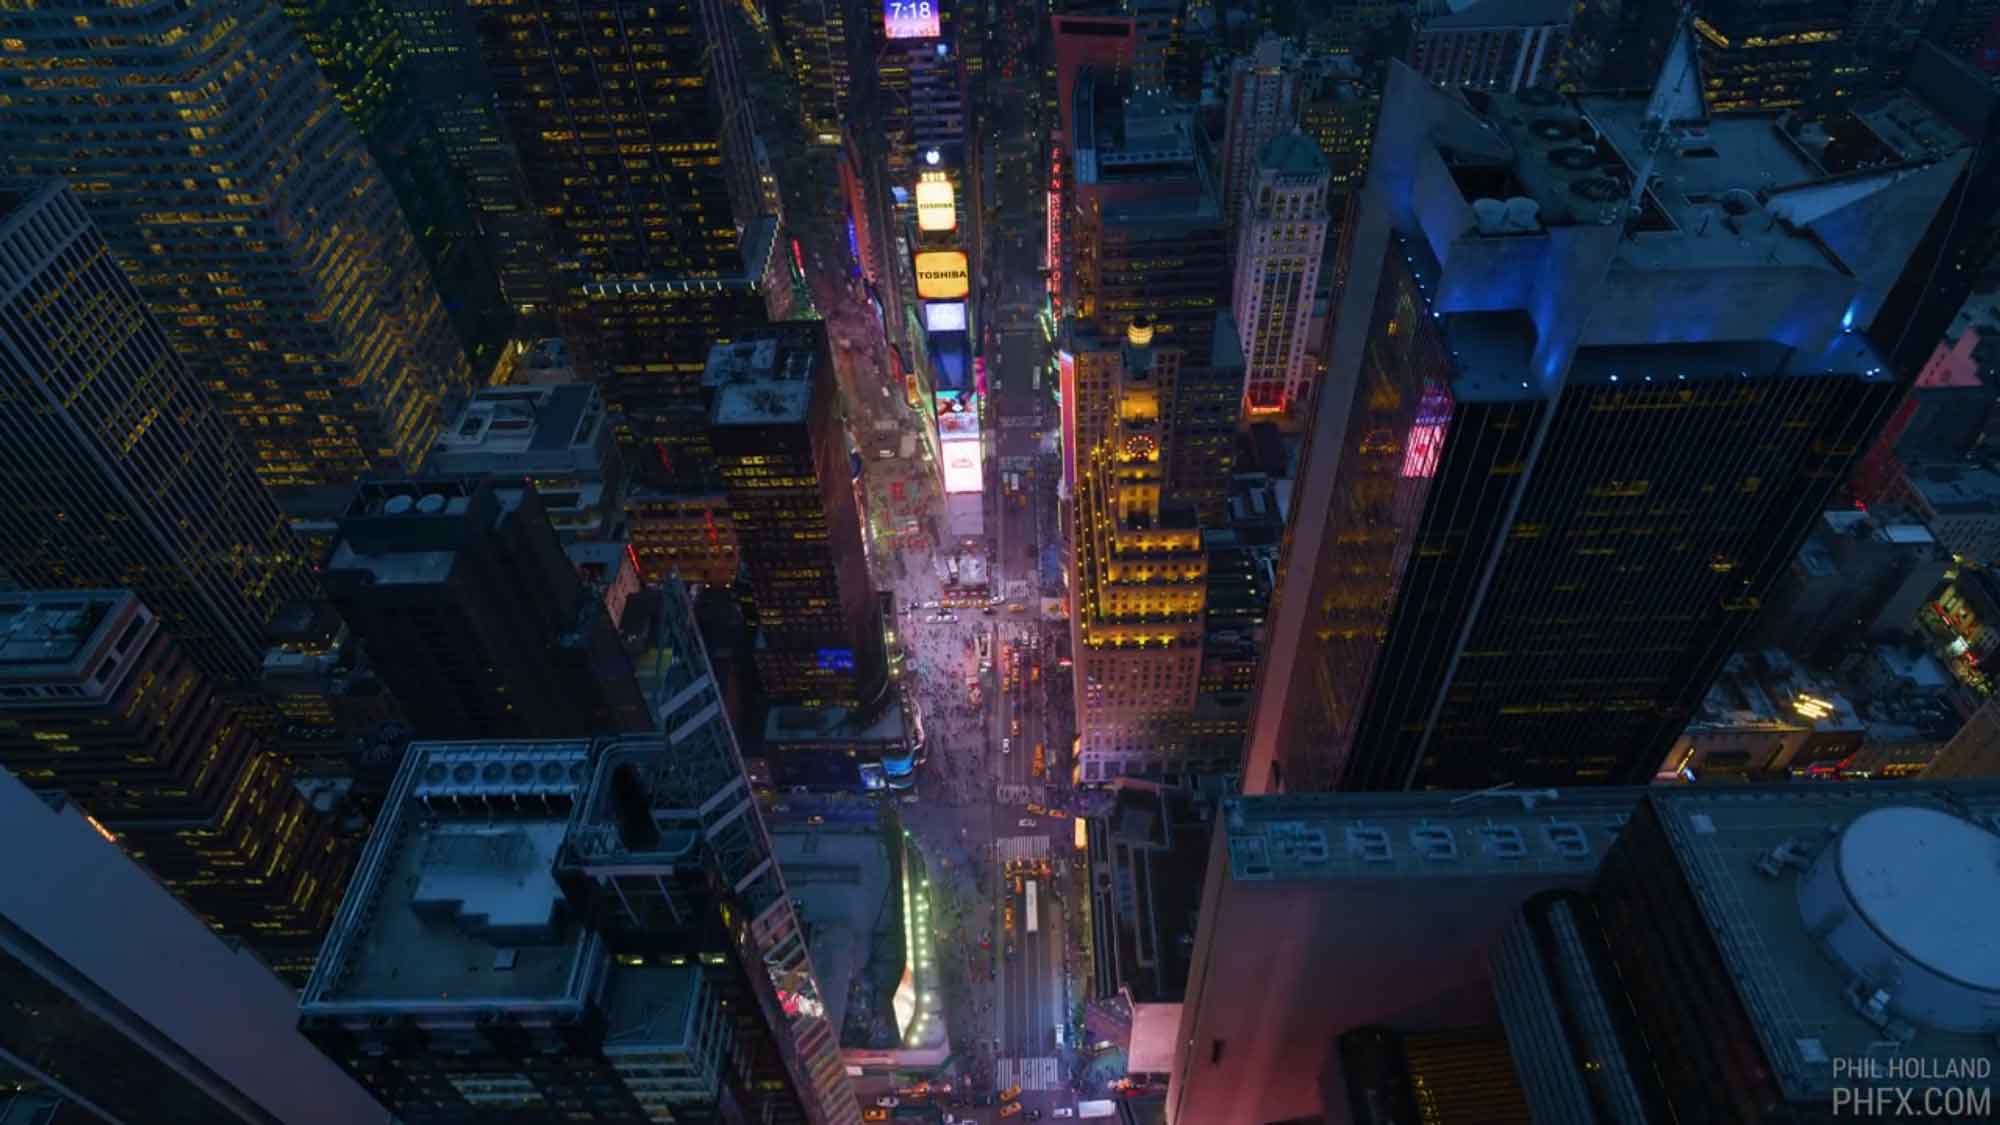 Have You Seen This Incredible New York City Flyover Filmed In 12k?